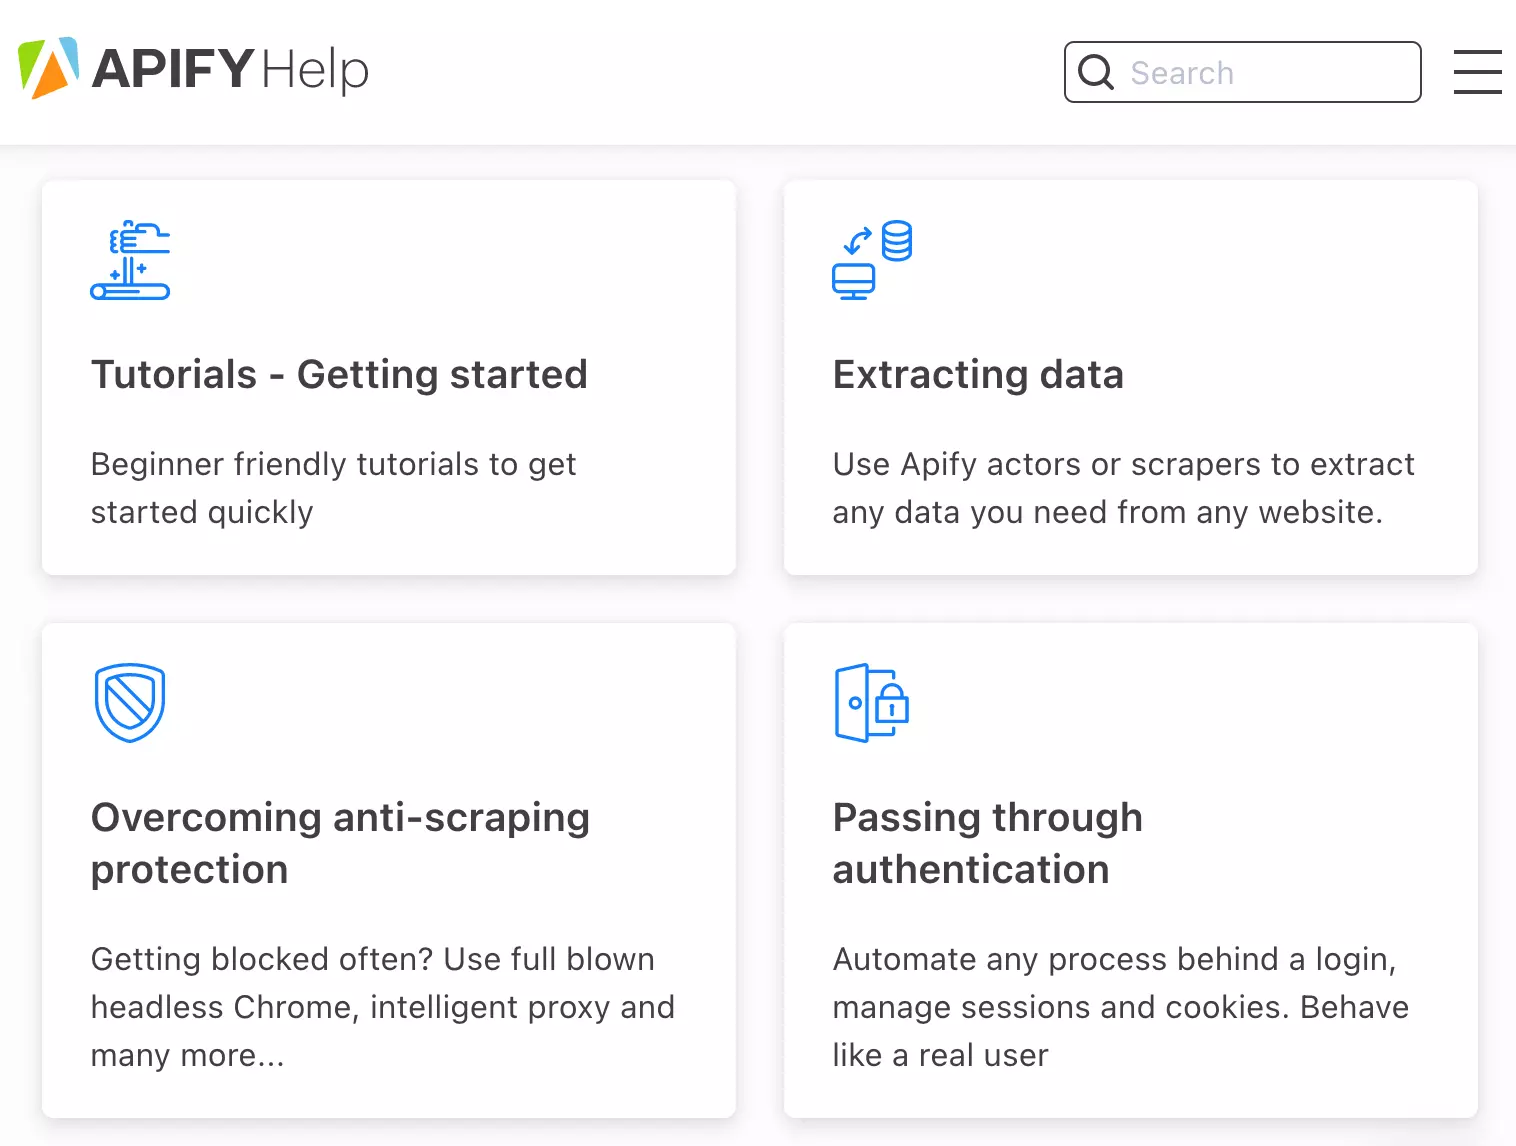 Apify Help articles are stored on Intercom